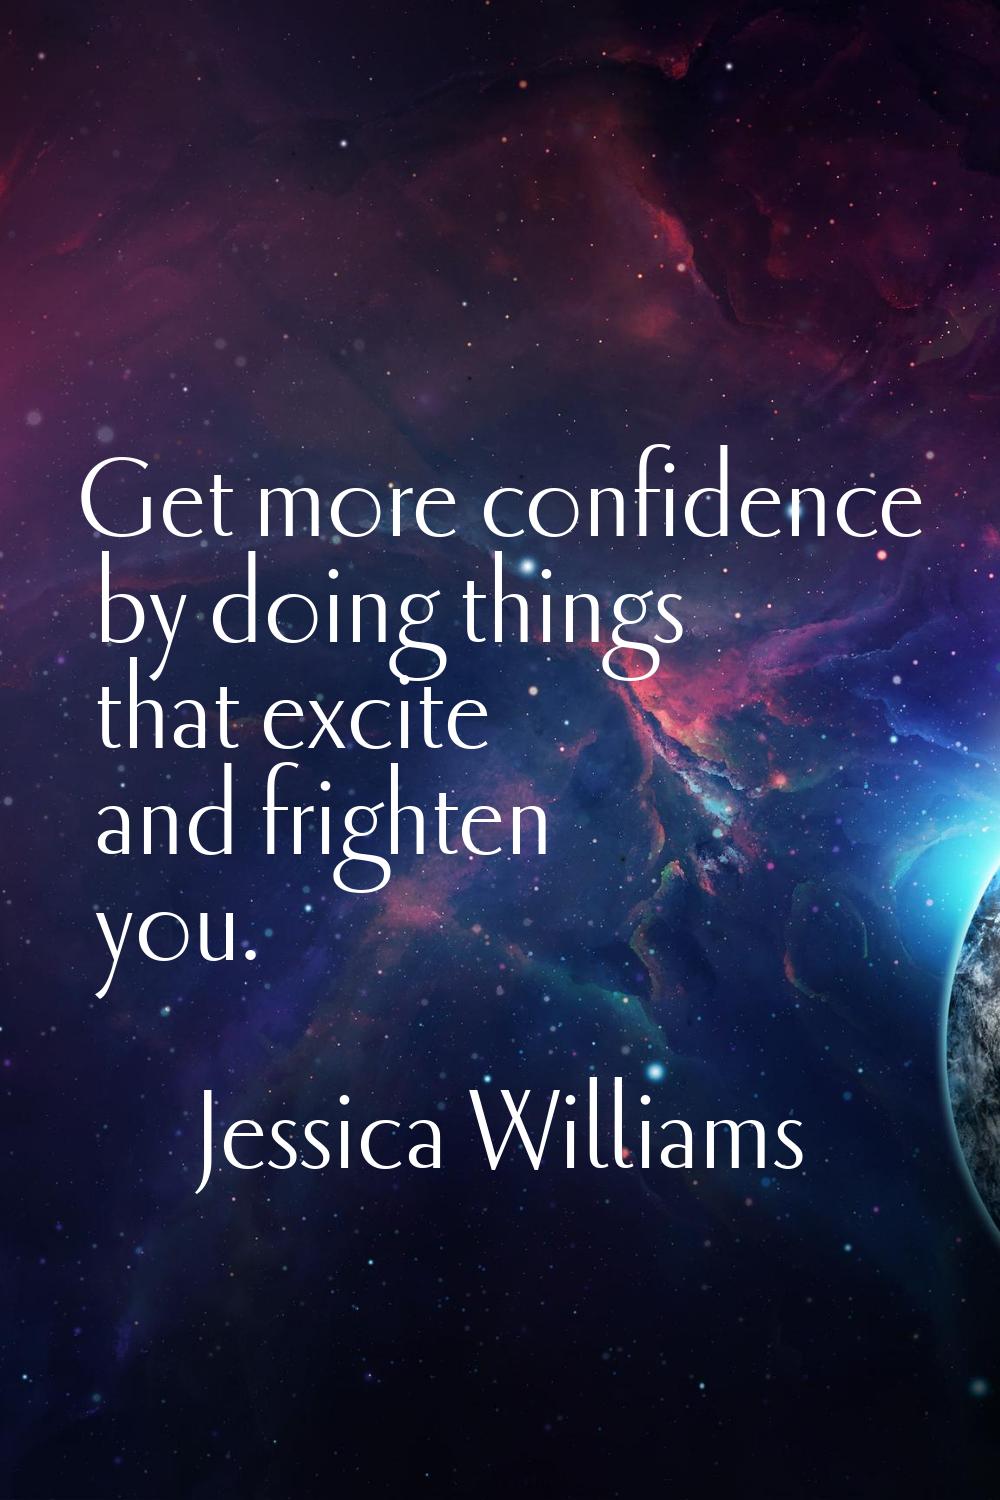 Get more confidence by doing things that excite and frighten you.